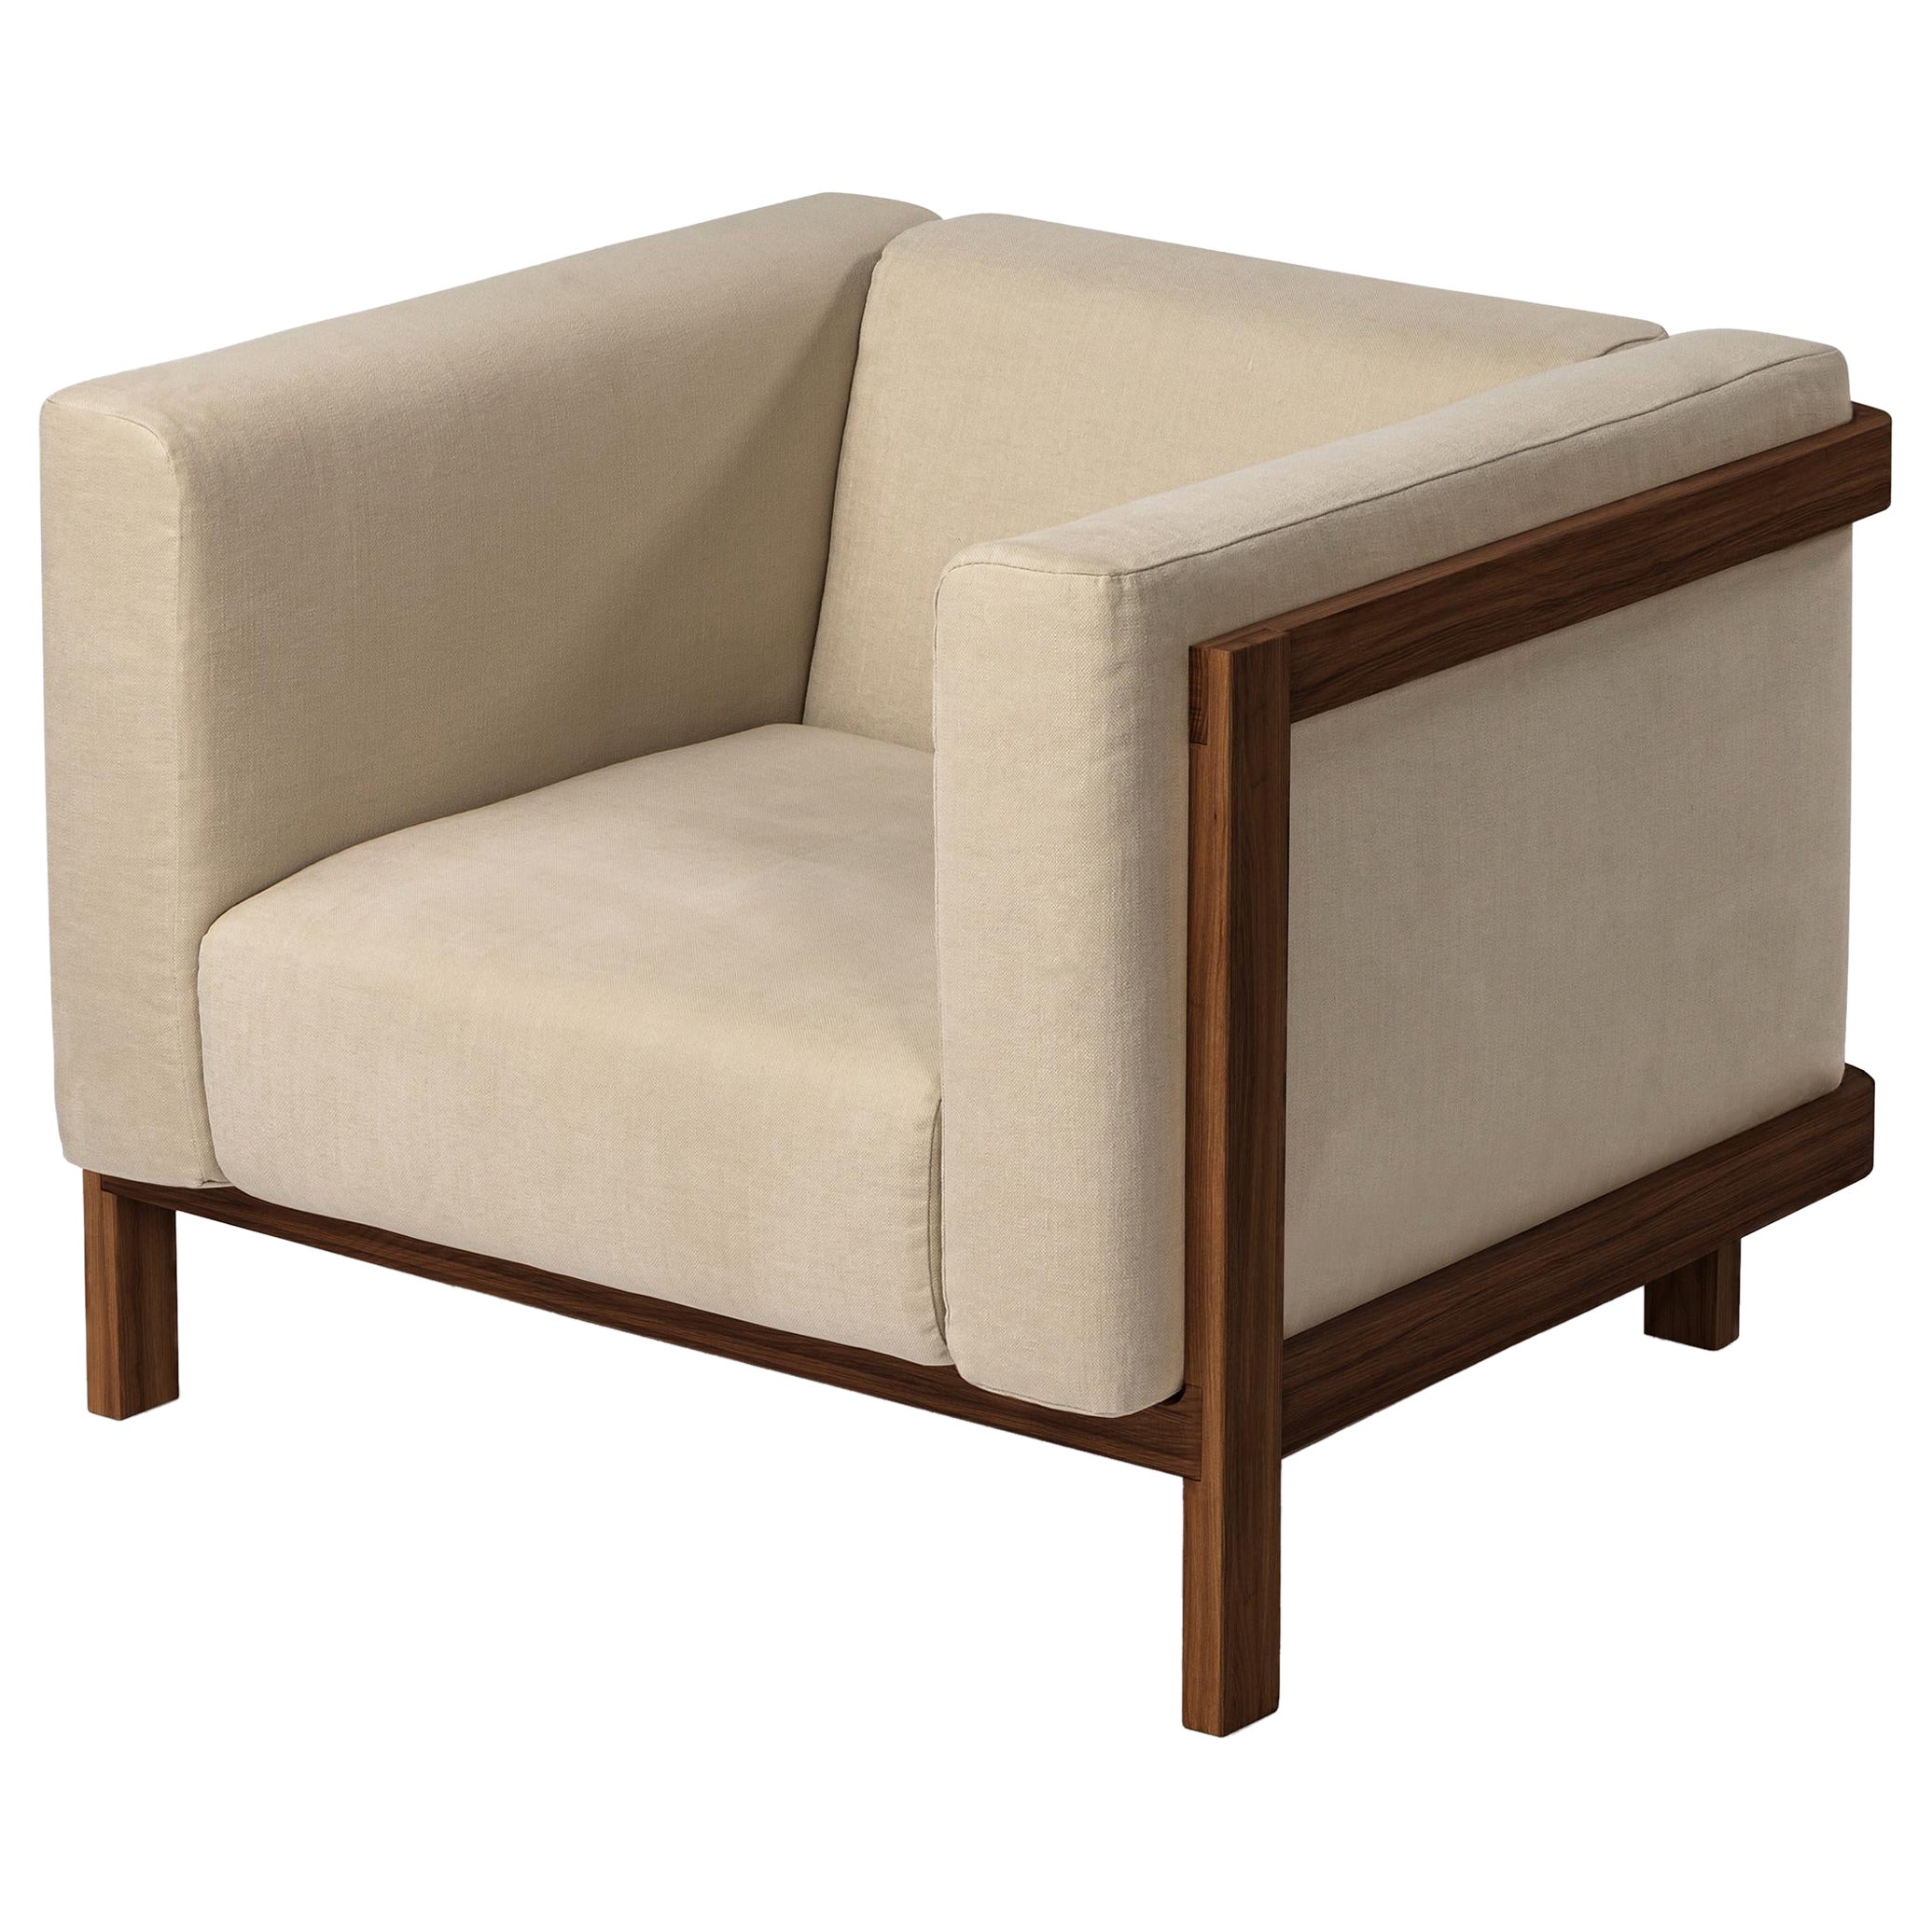 Minimalist one seater sofa walnut - fabric upholstered For Sale